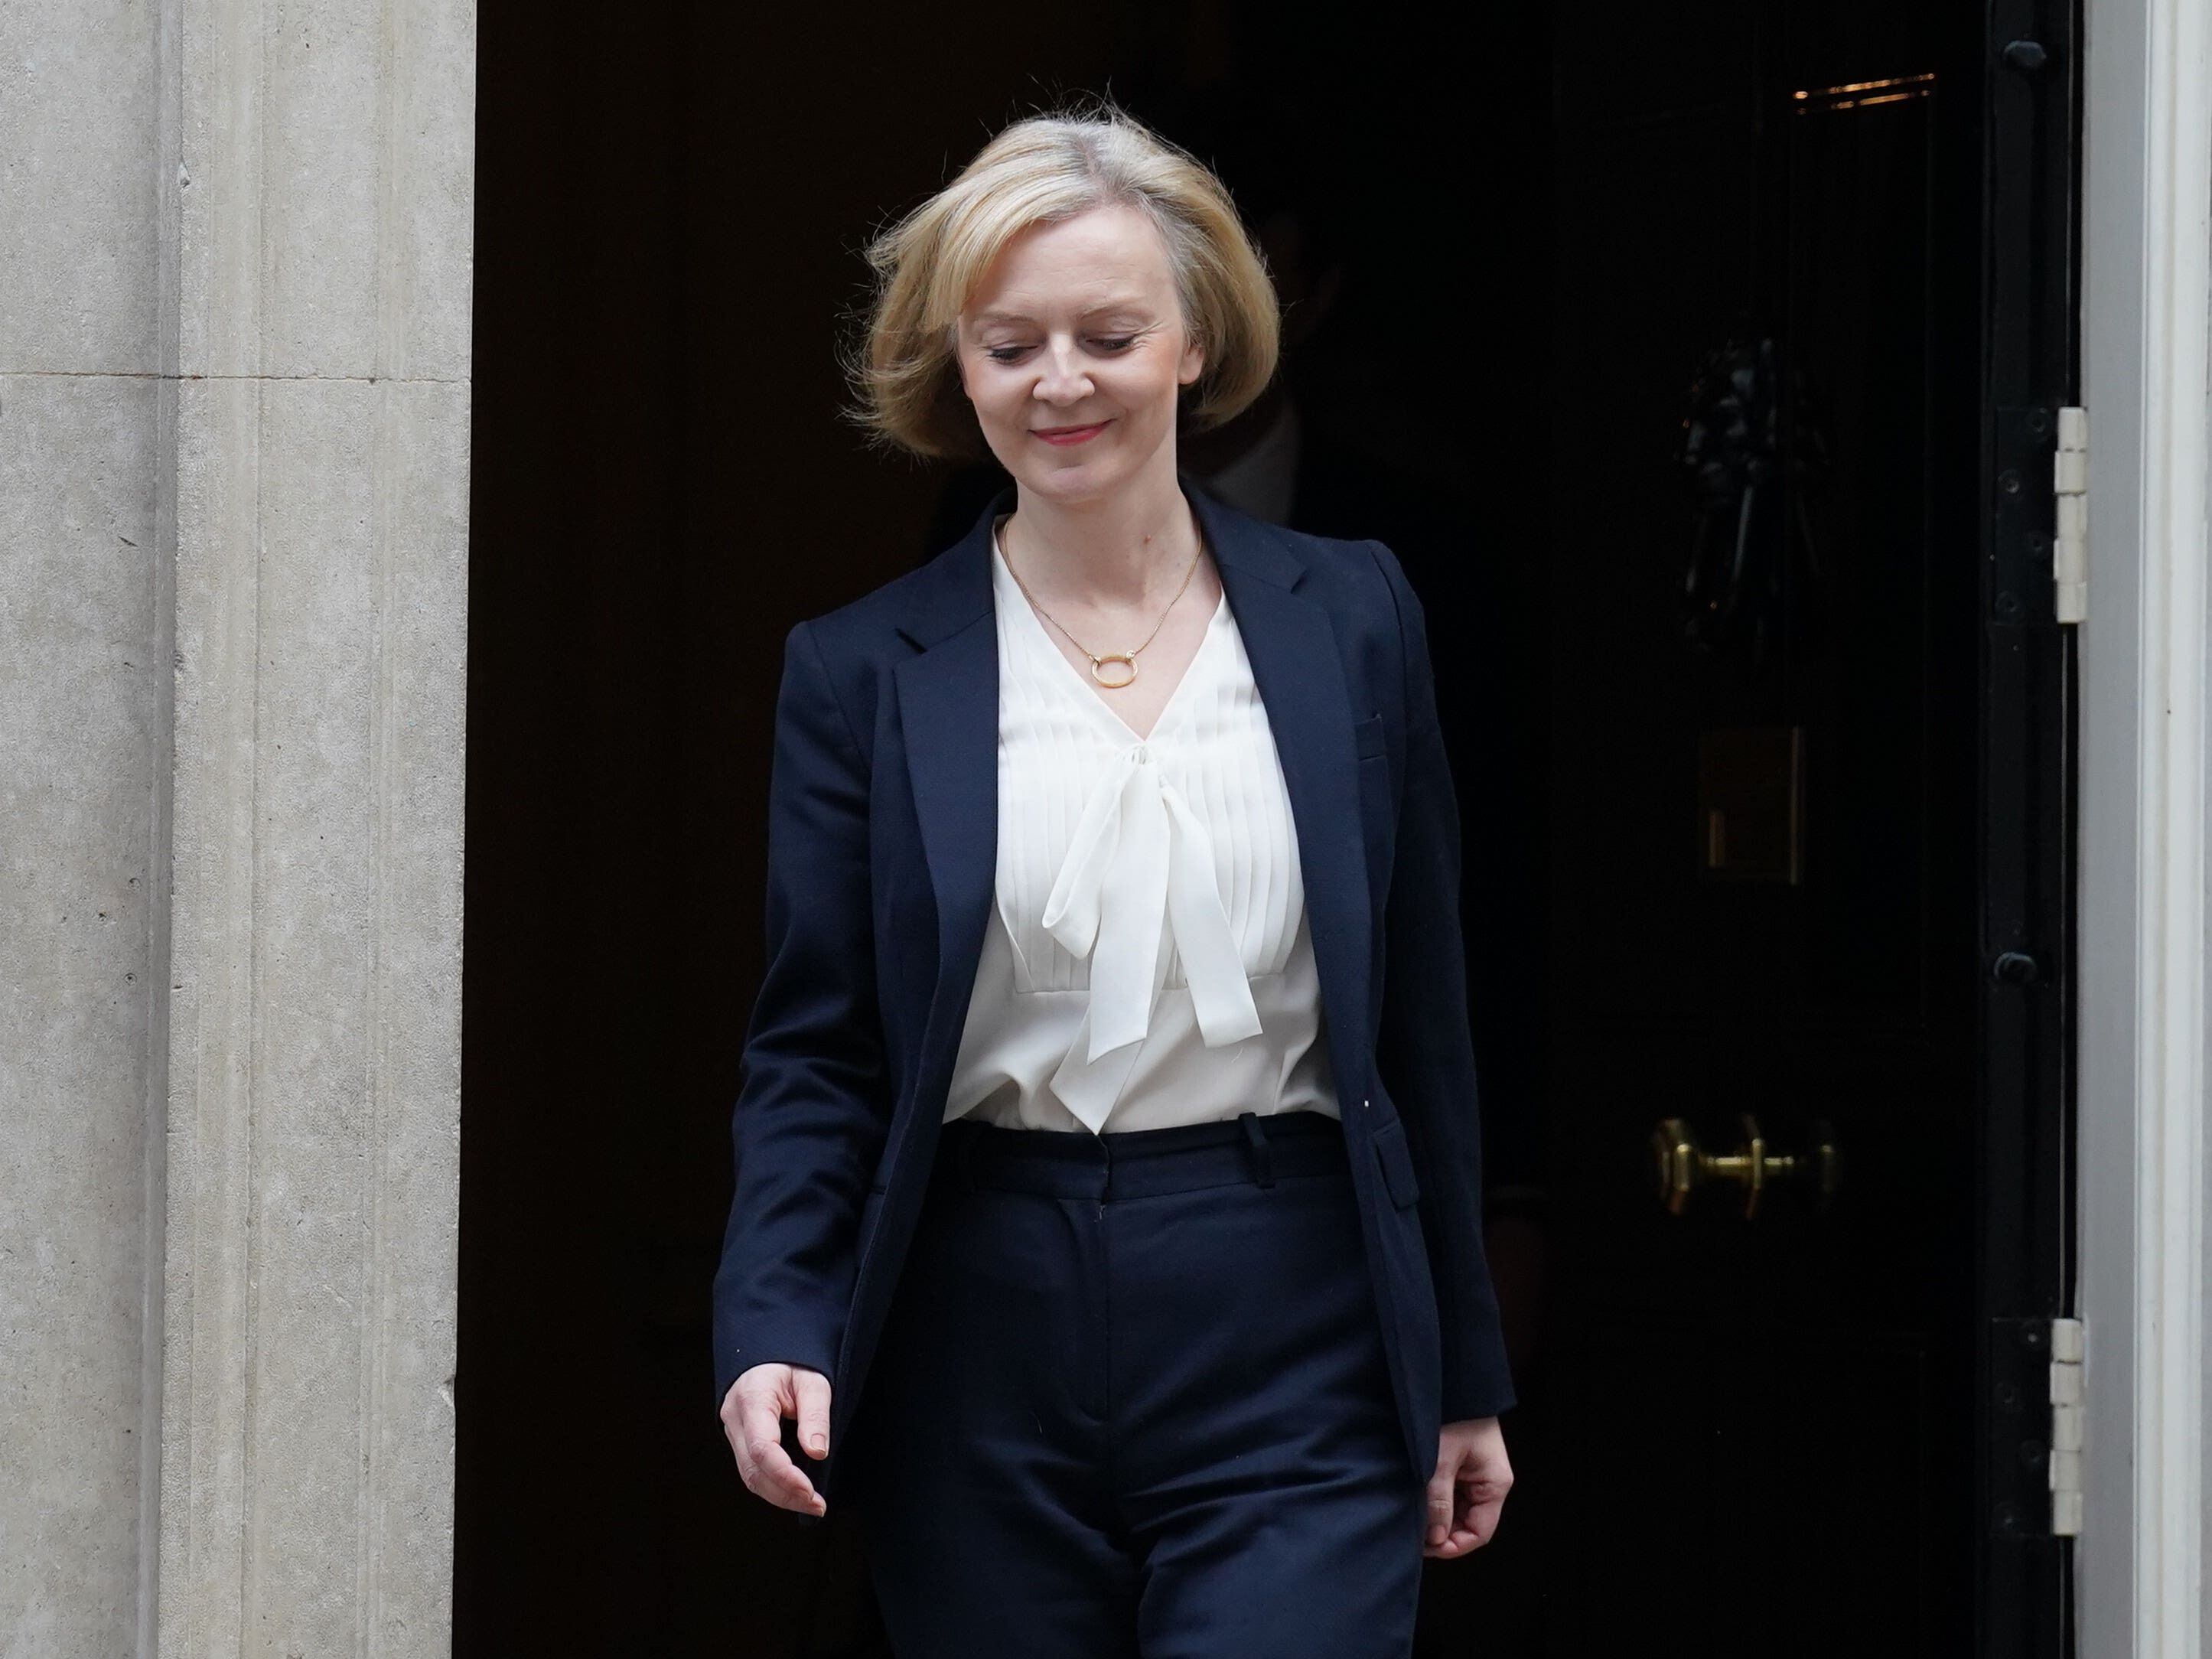 Liz Truss aide suspension lifted after hostile briefing probe – Downing Street